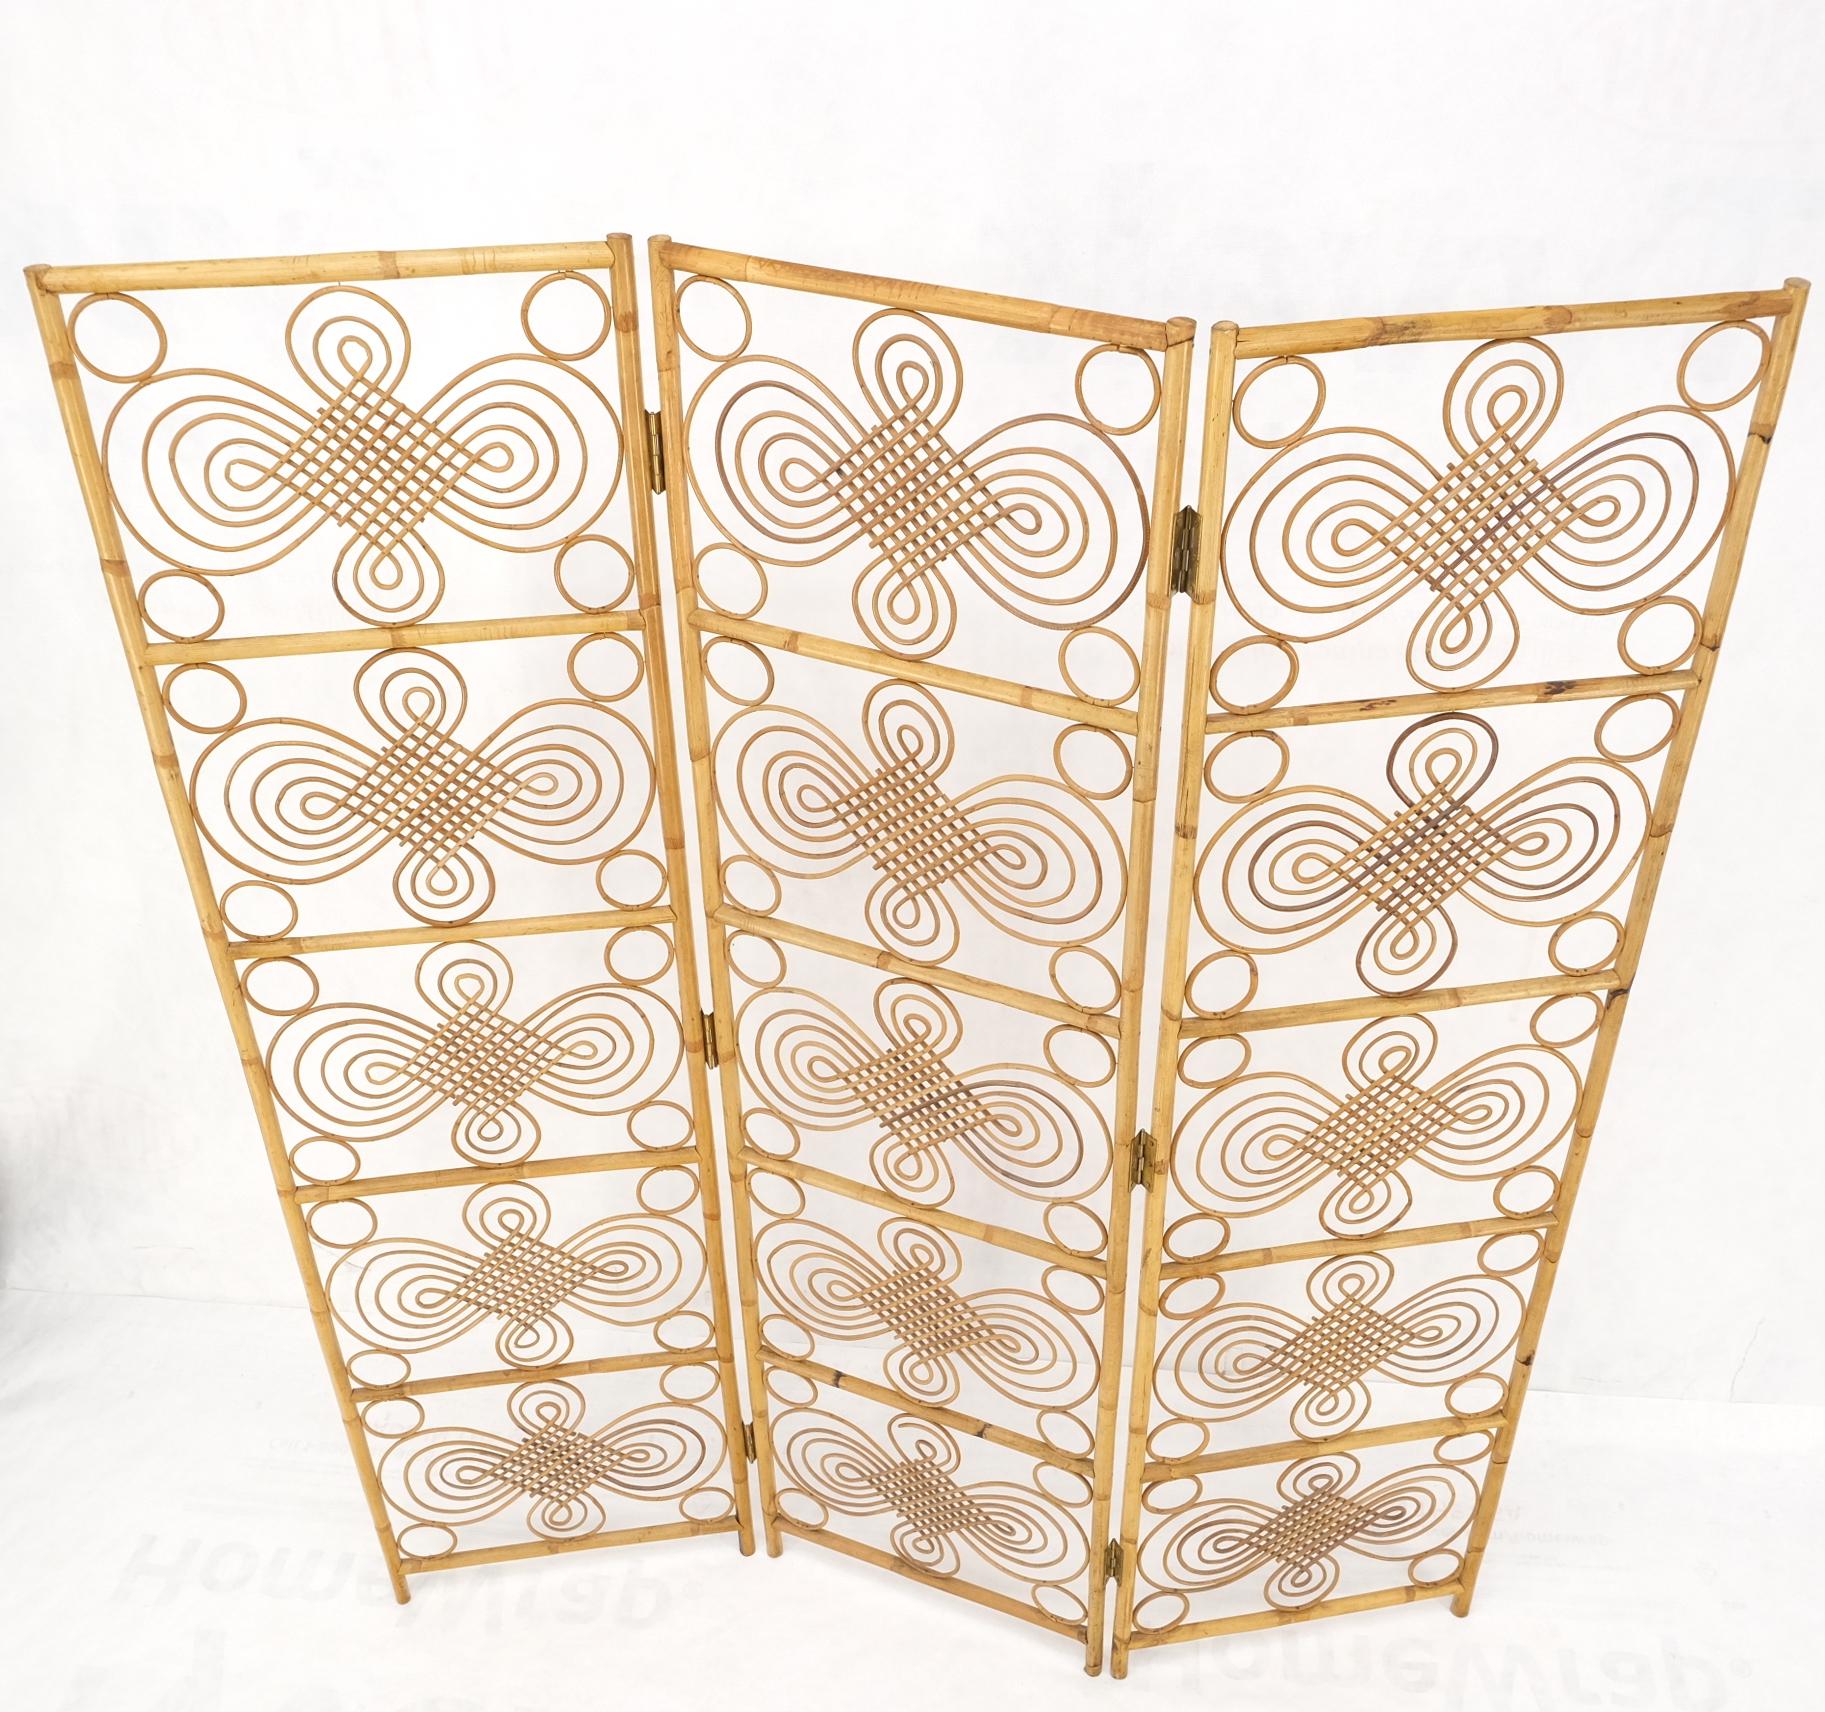 Lacquered Mid Century Stunning Pattern Three Panel Bamboo Rattan Room Divider Screen Mint For Sale